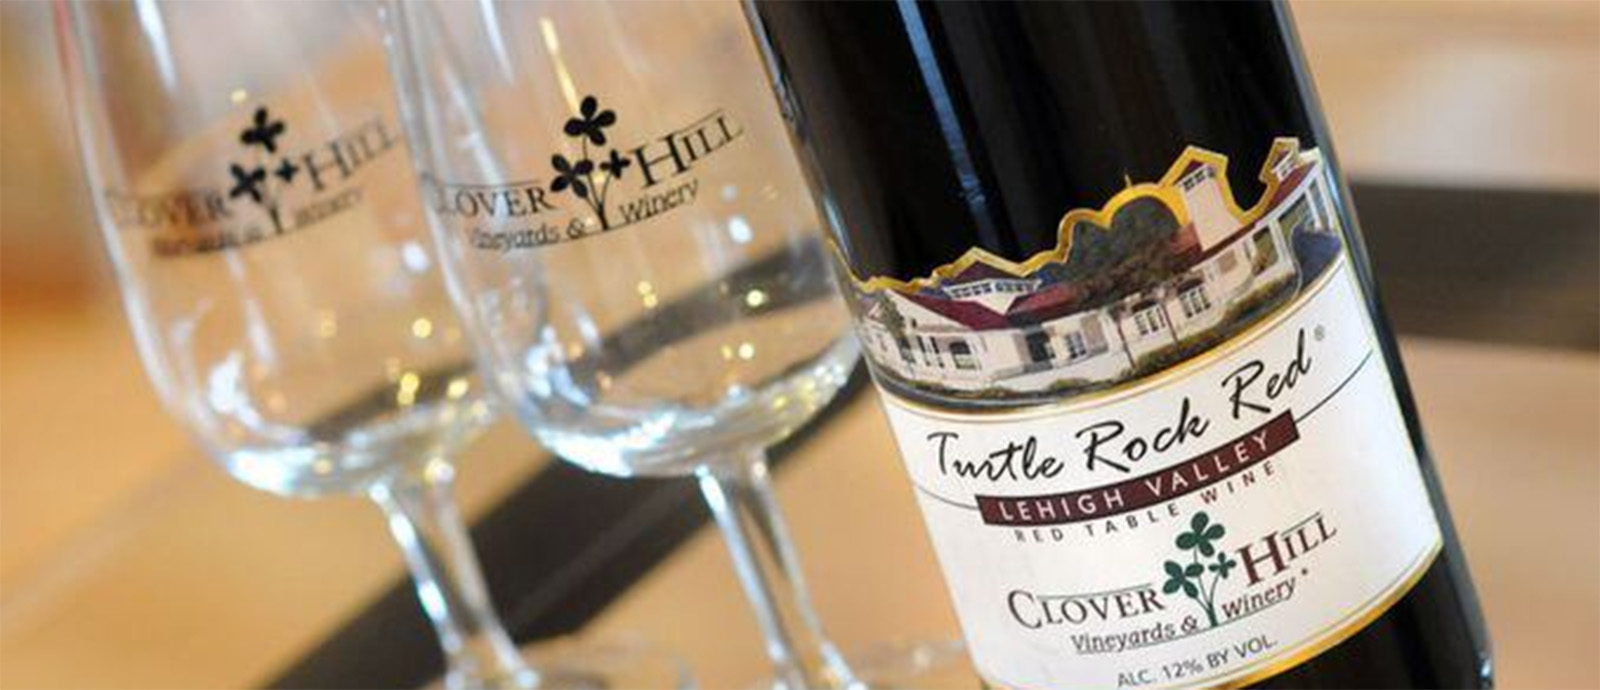 Turtle Rock Red wine from Clover Hill Winery